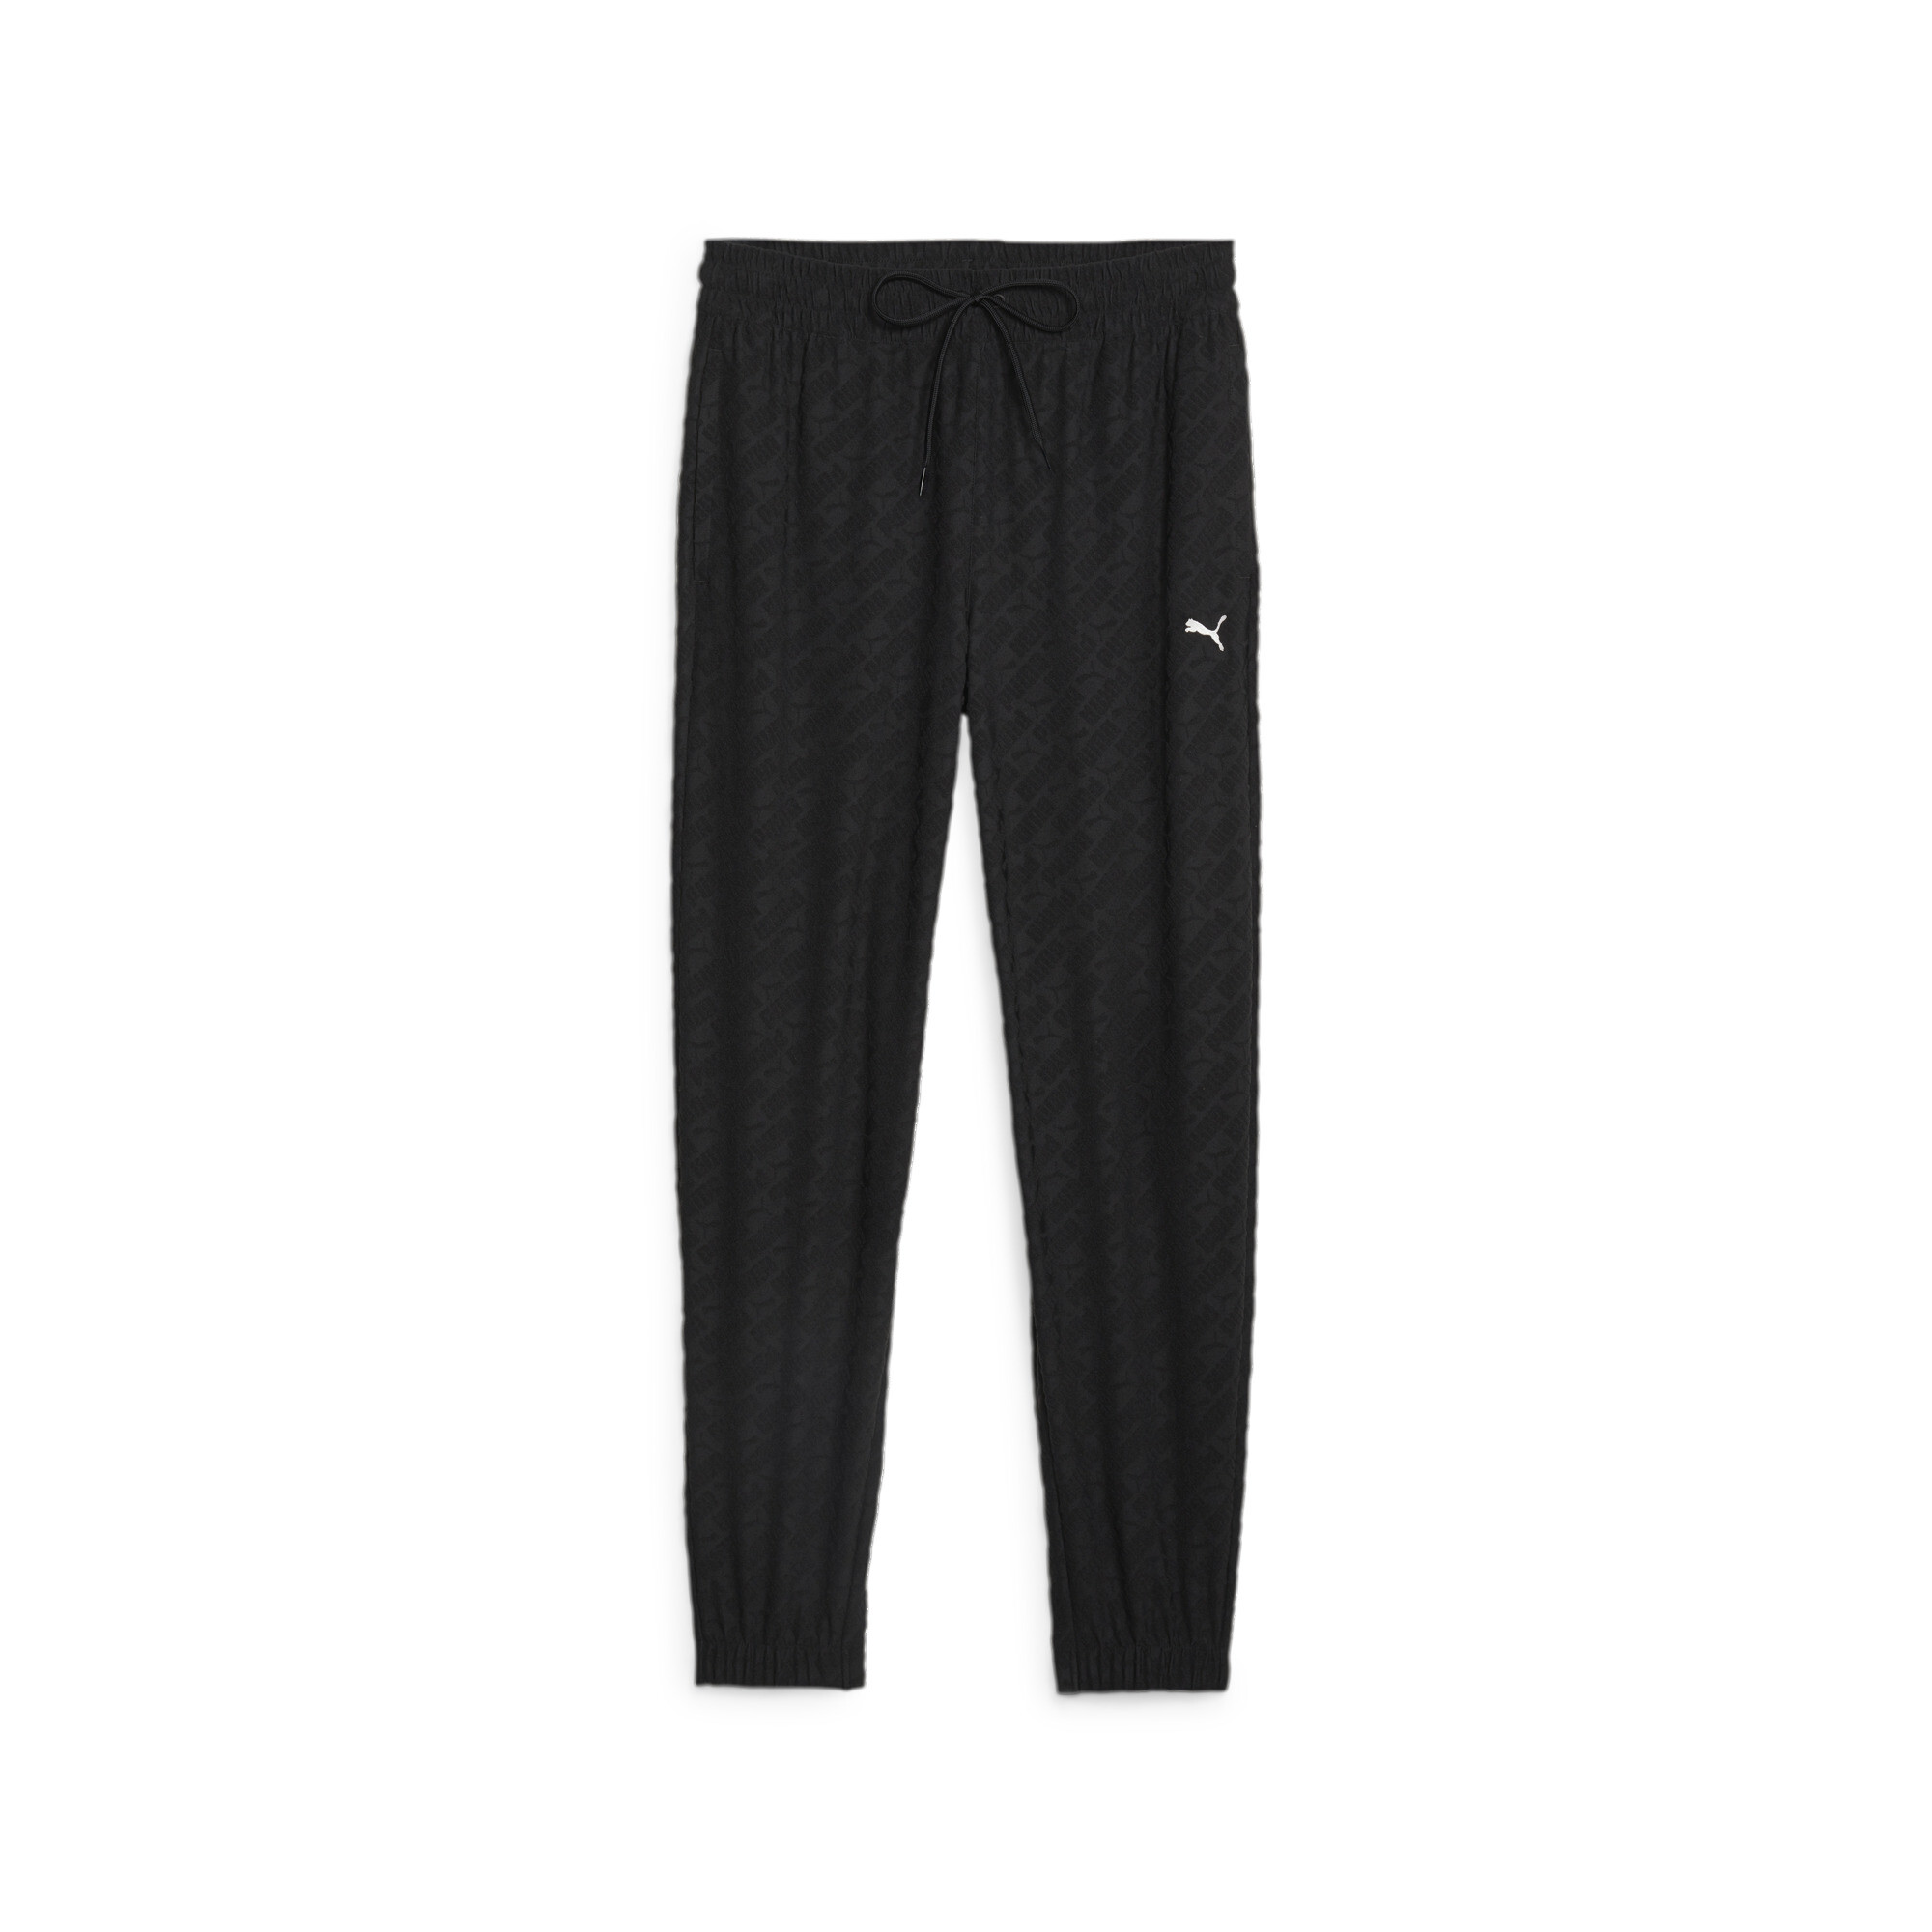 Women's PUMA Fit Training Branded Jogger In 10 - Black, Size XS